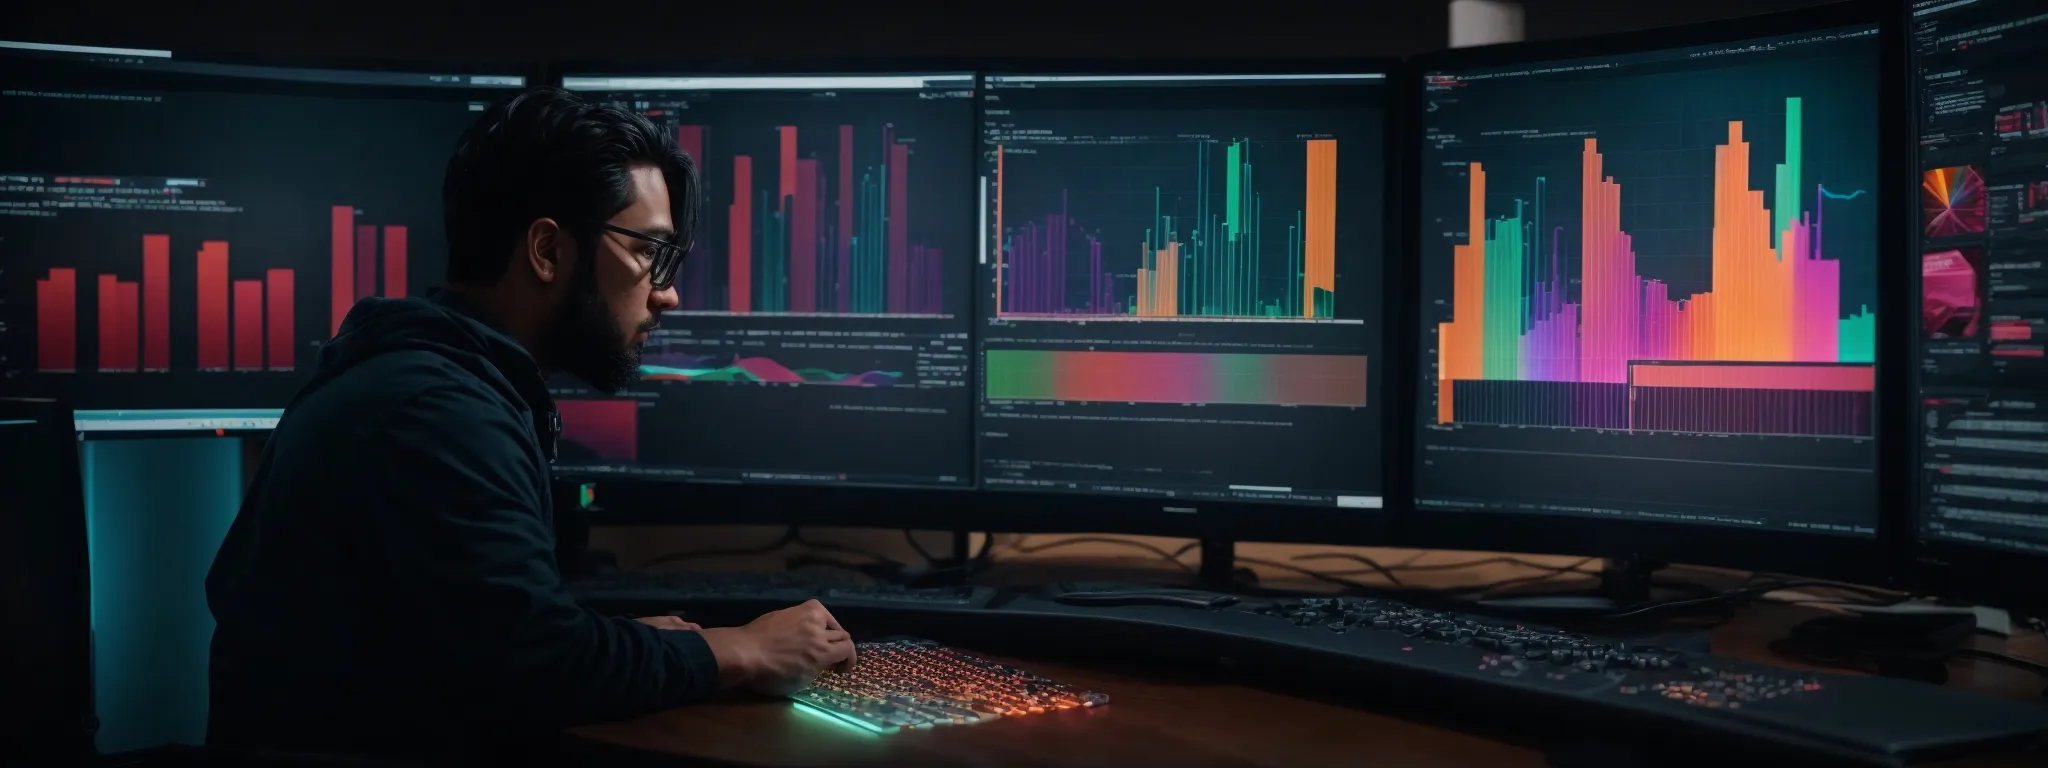 a web developer analyzes website performance metrics on a large monitor displaying colorful graphs and user interaction heatmaps.